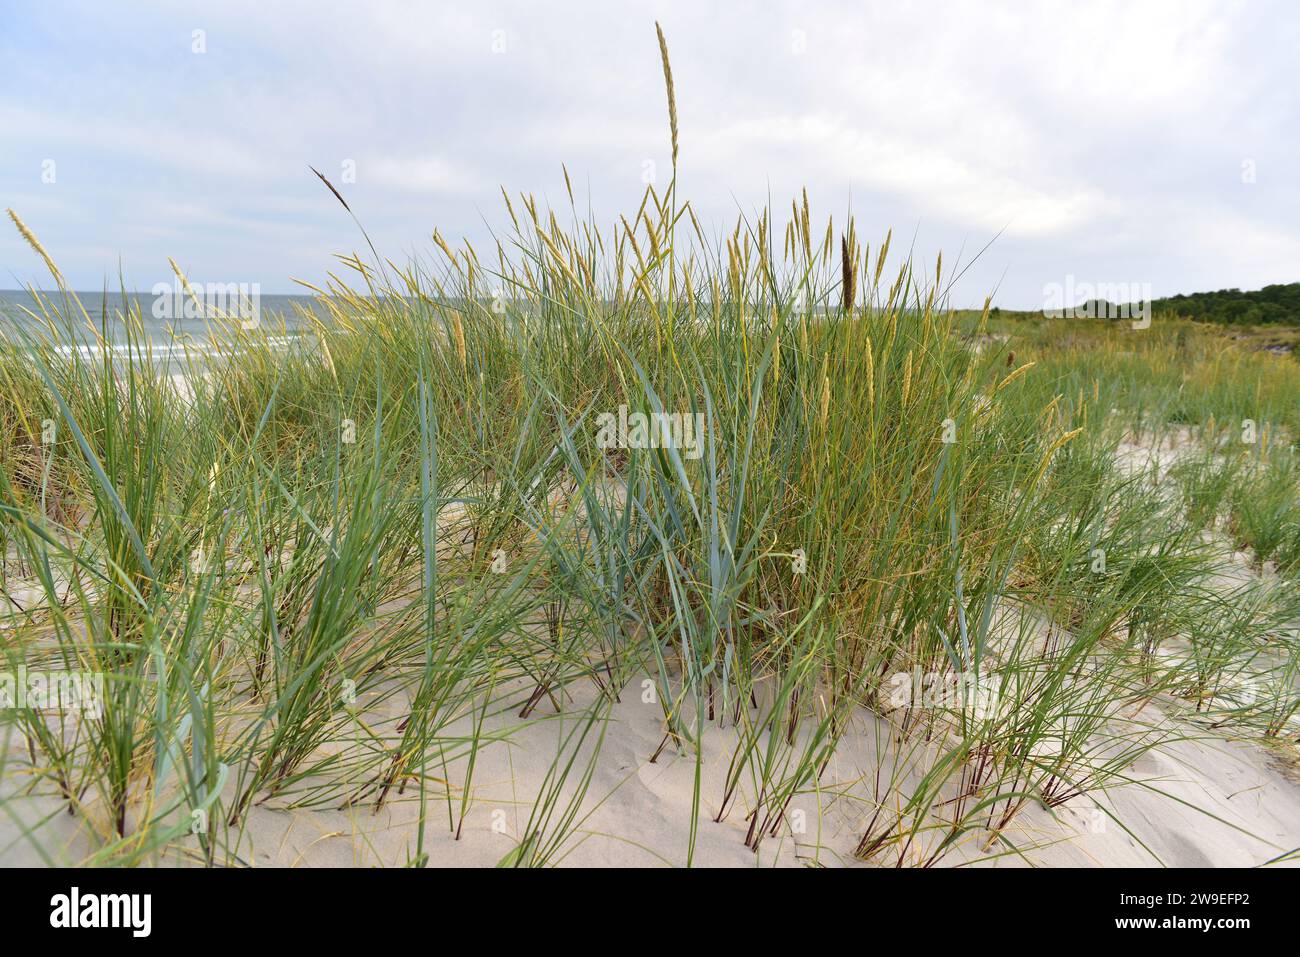 Blue lyme grass or sea lyme grass (Leymus arenarius or Elymus arenarius) is a perennial herb native to west north Europe. This photo was taken in Sand Stock Photo